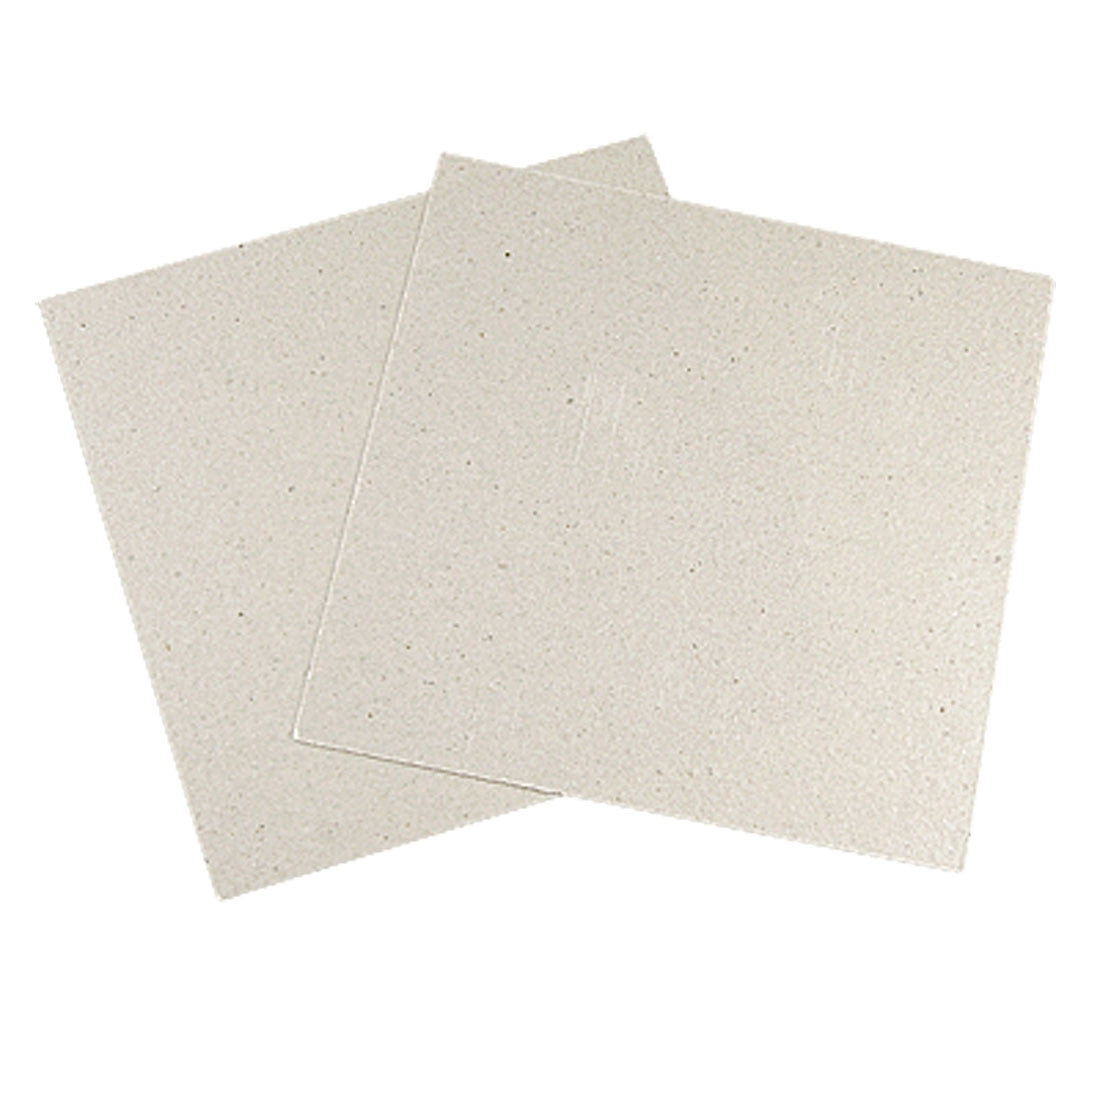 2 Pcs Replacement 11 x 11cm Mica Plates for Microwave Oven - Walmart.com